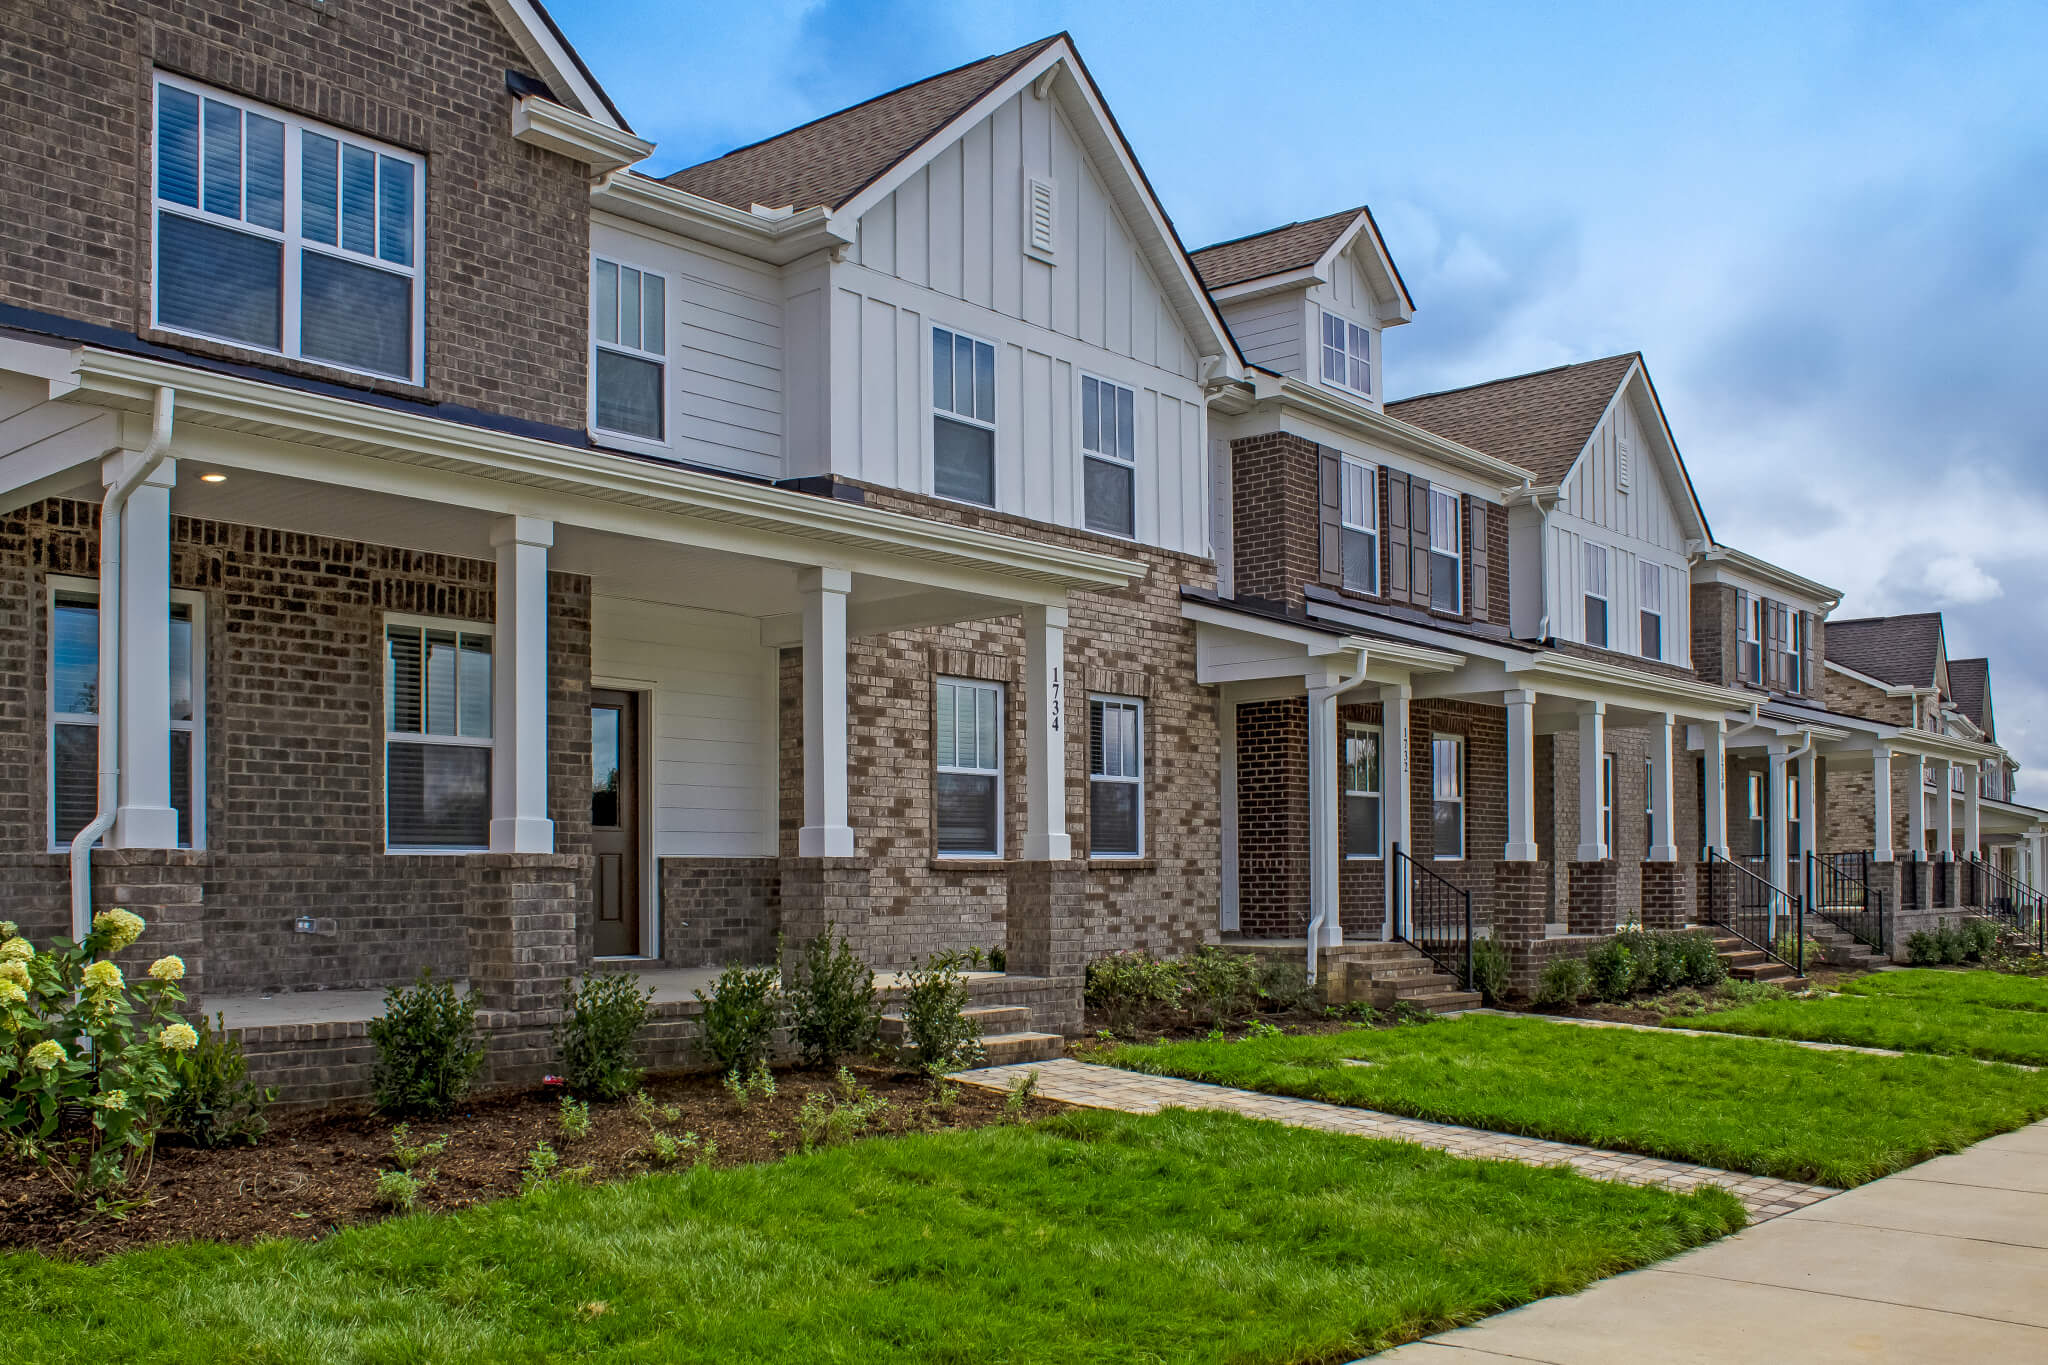 Luxury Villas and Townhomes for Lease by 360 Communities - Durham Farms New Homes for Sale in Hendersonville, TN